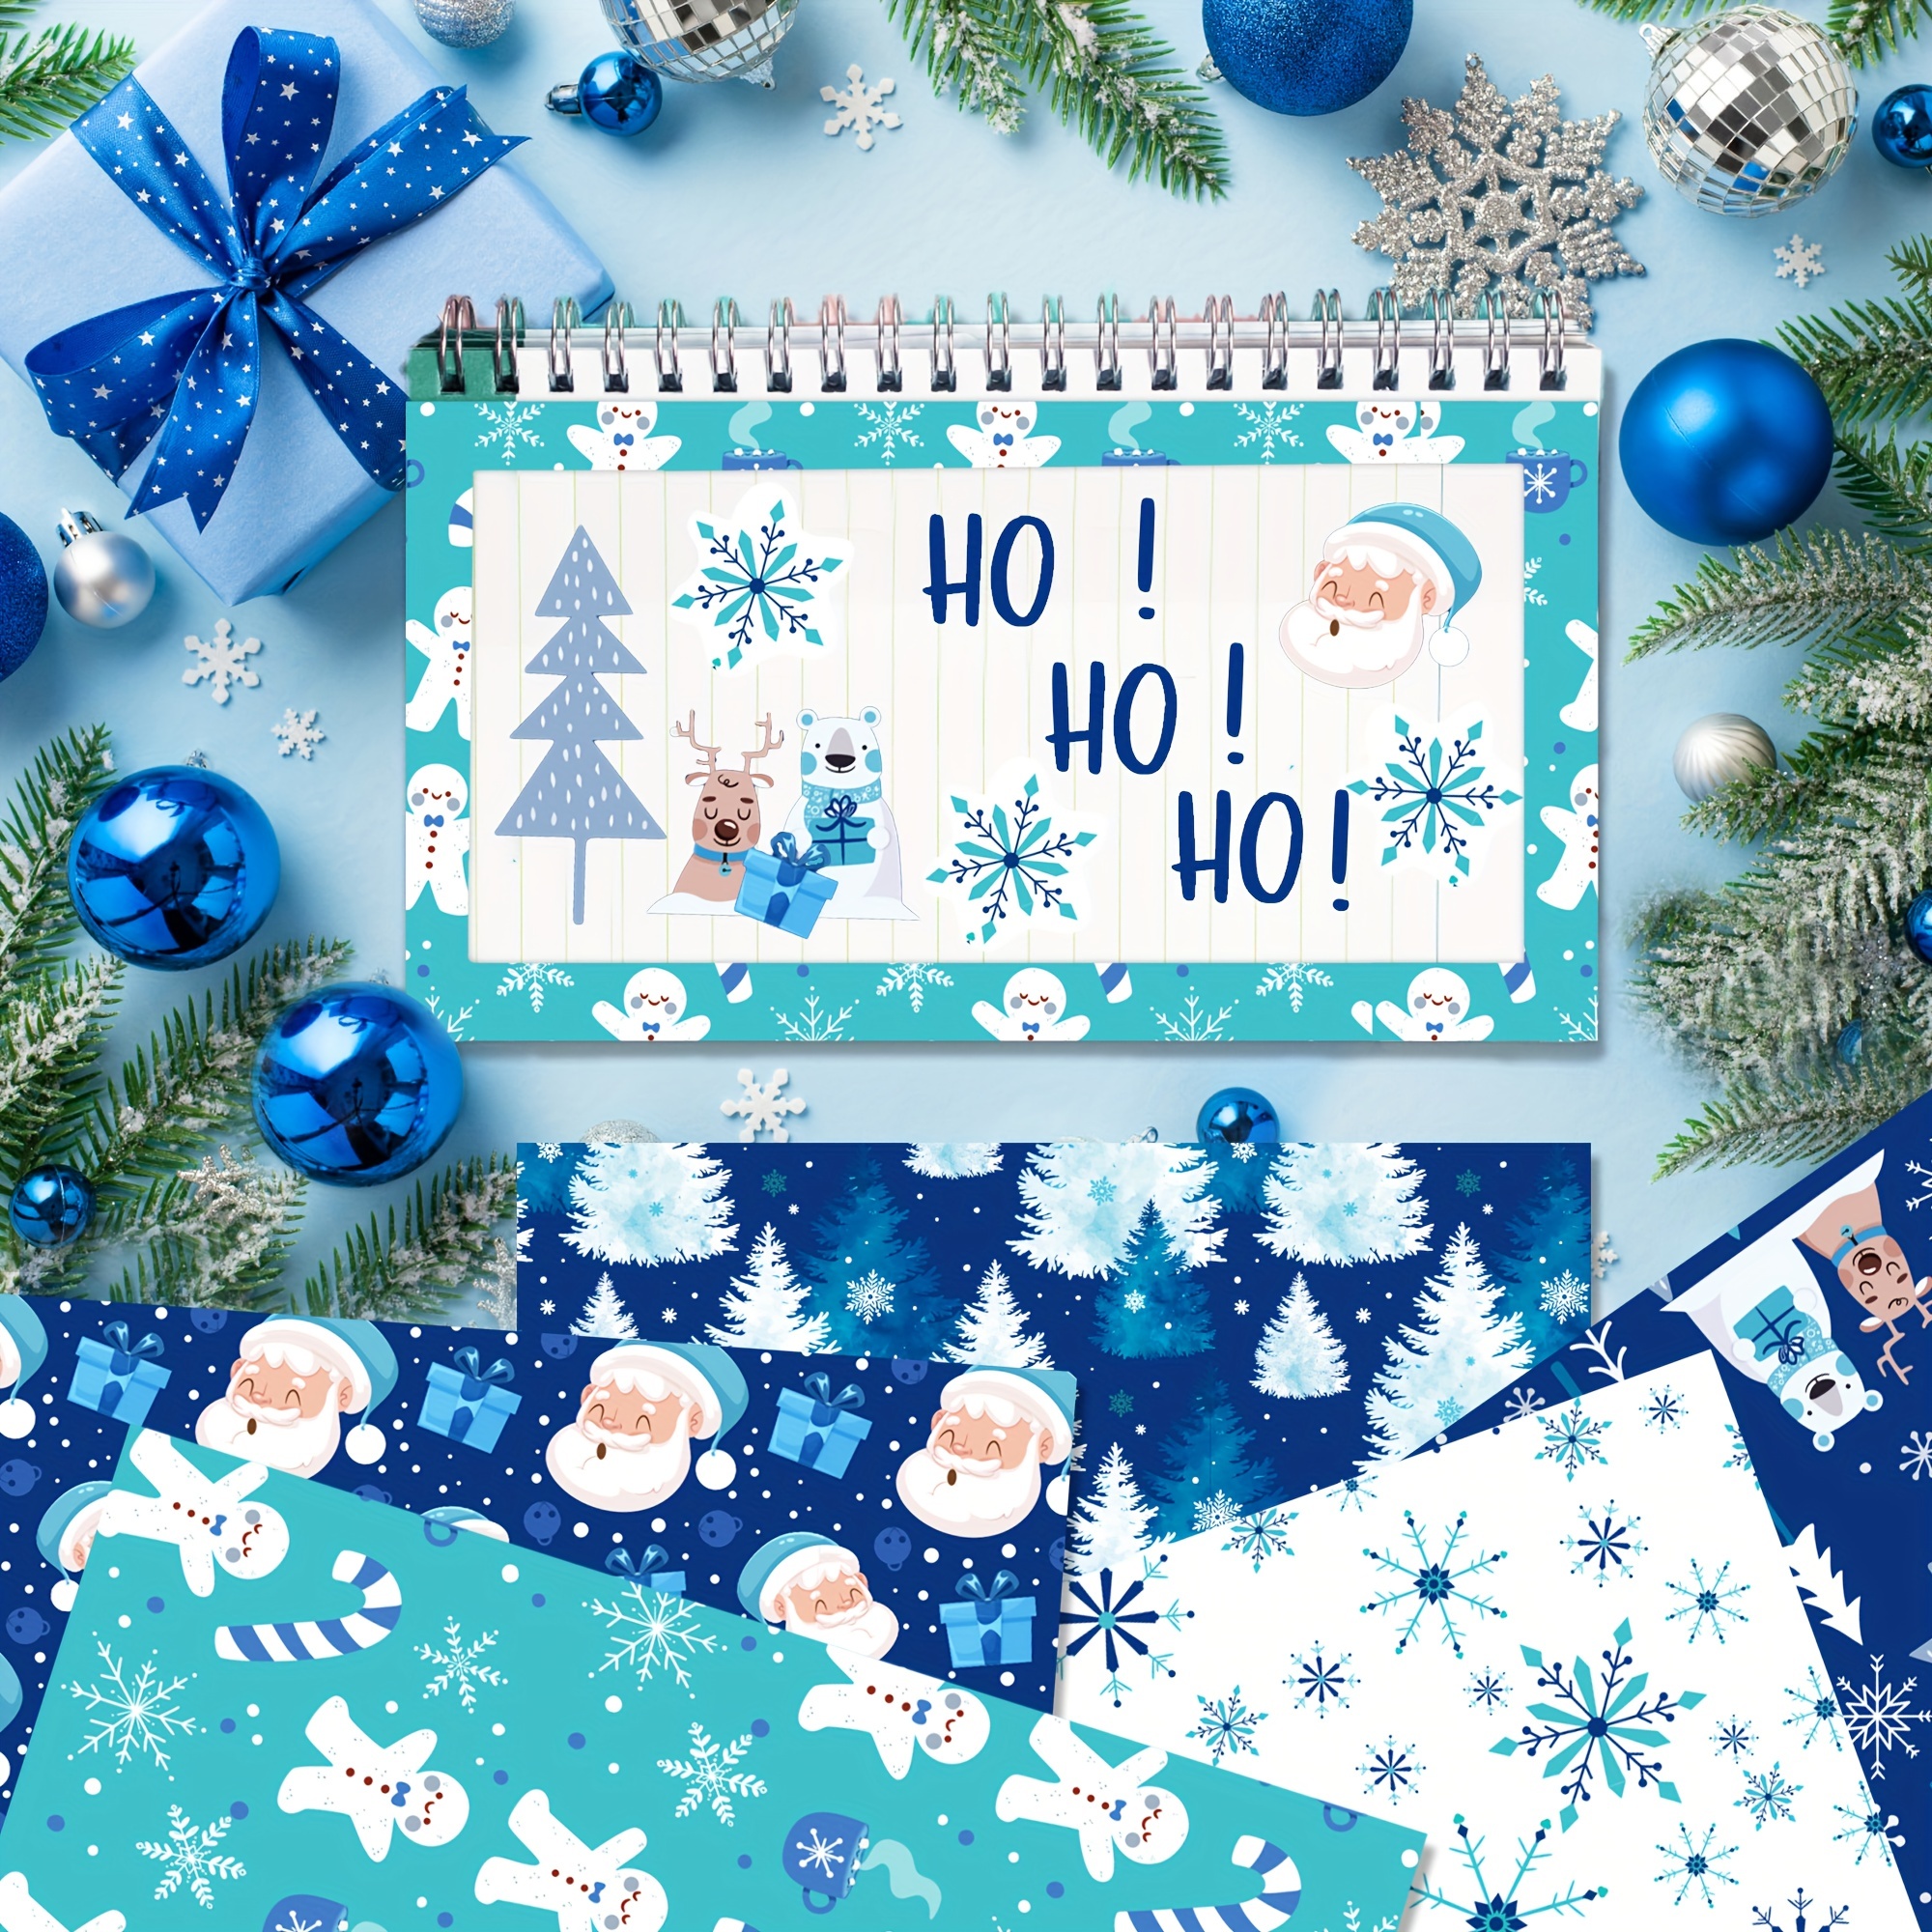 Christmas Watercolor #2 - twelve double-sided scrapbook papers